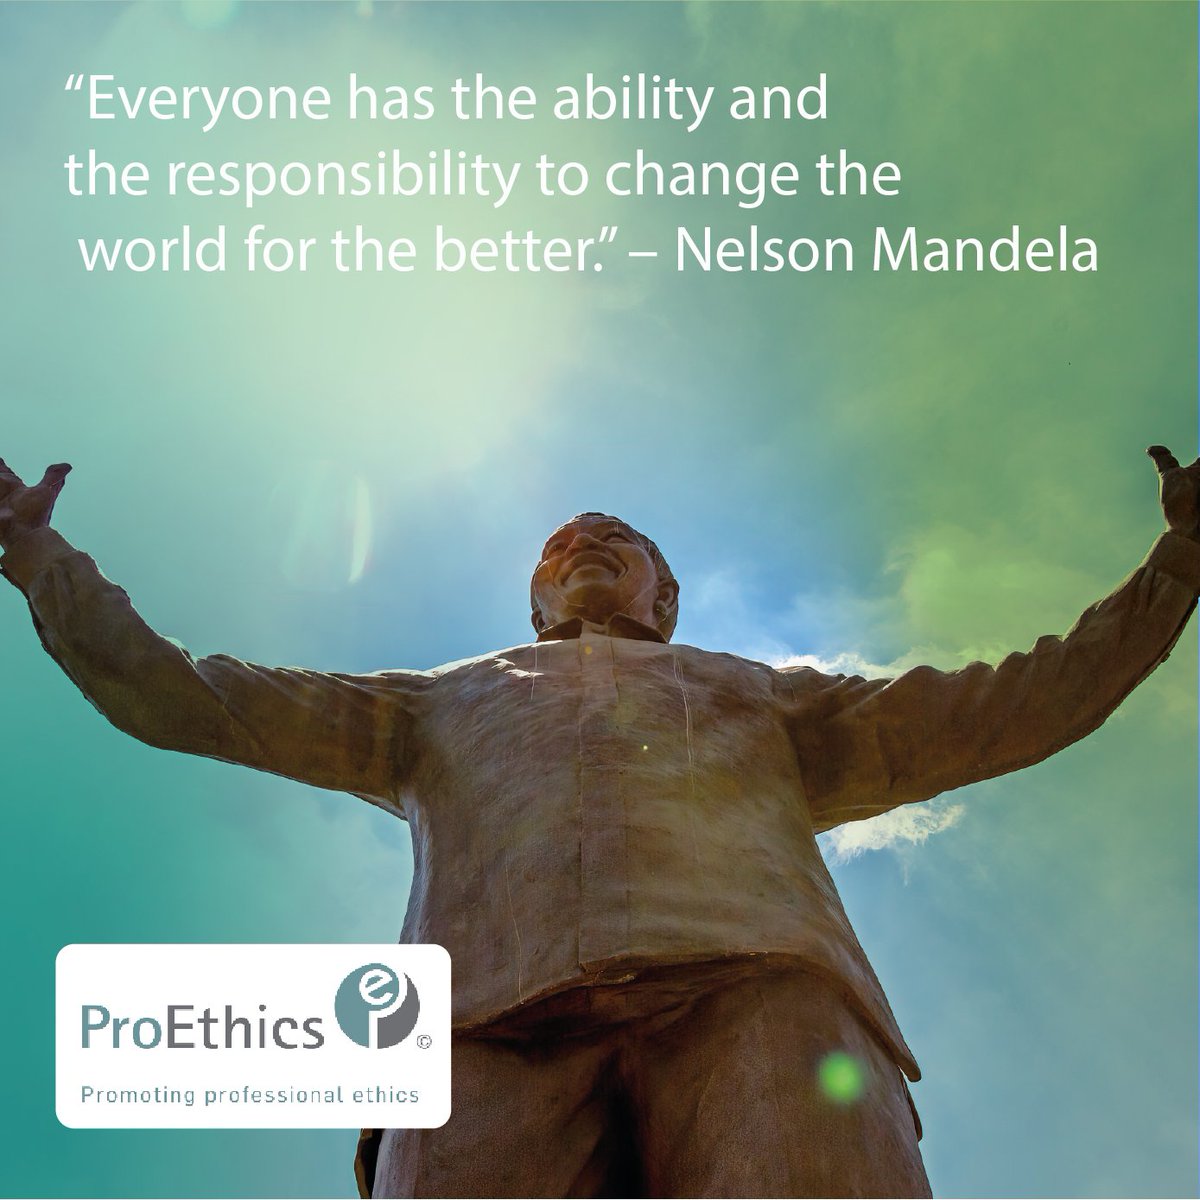 Today we celebrate Mandela Day. This is an occasion for us all to take action and inspire change.